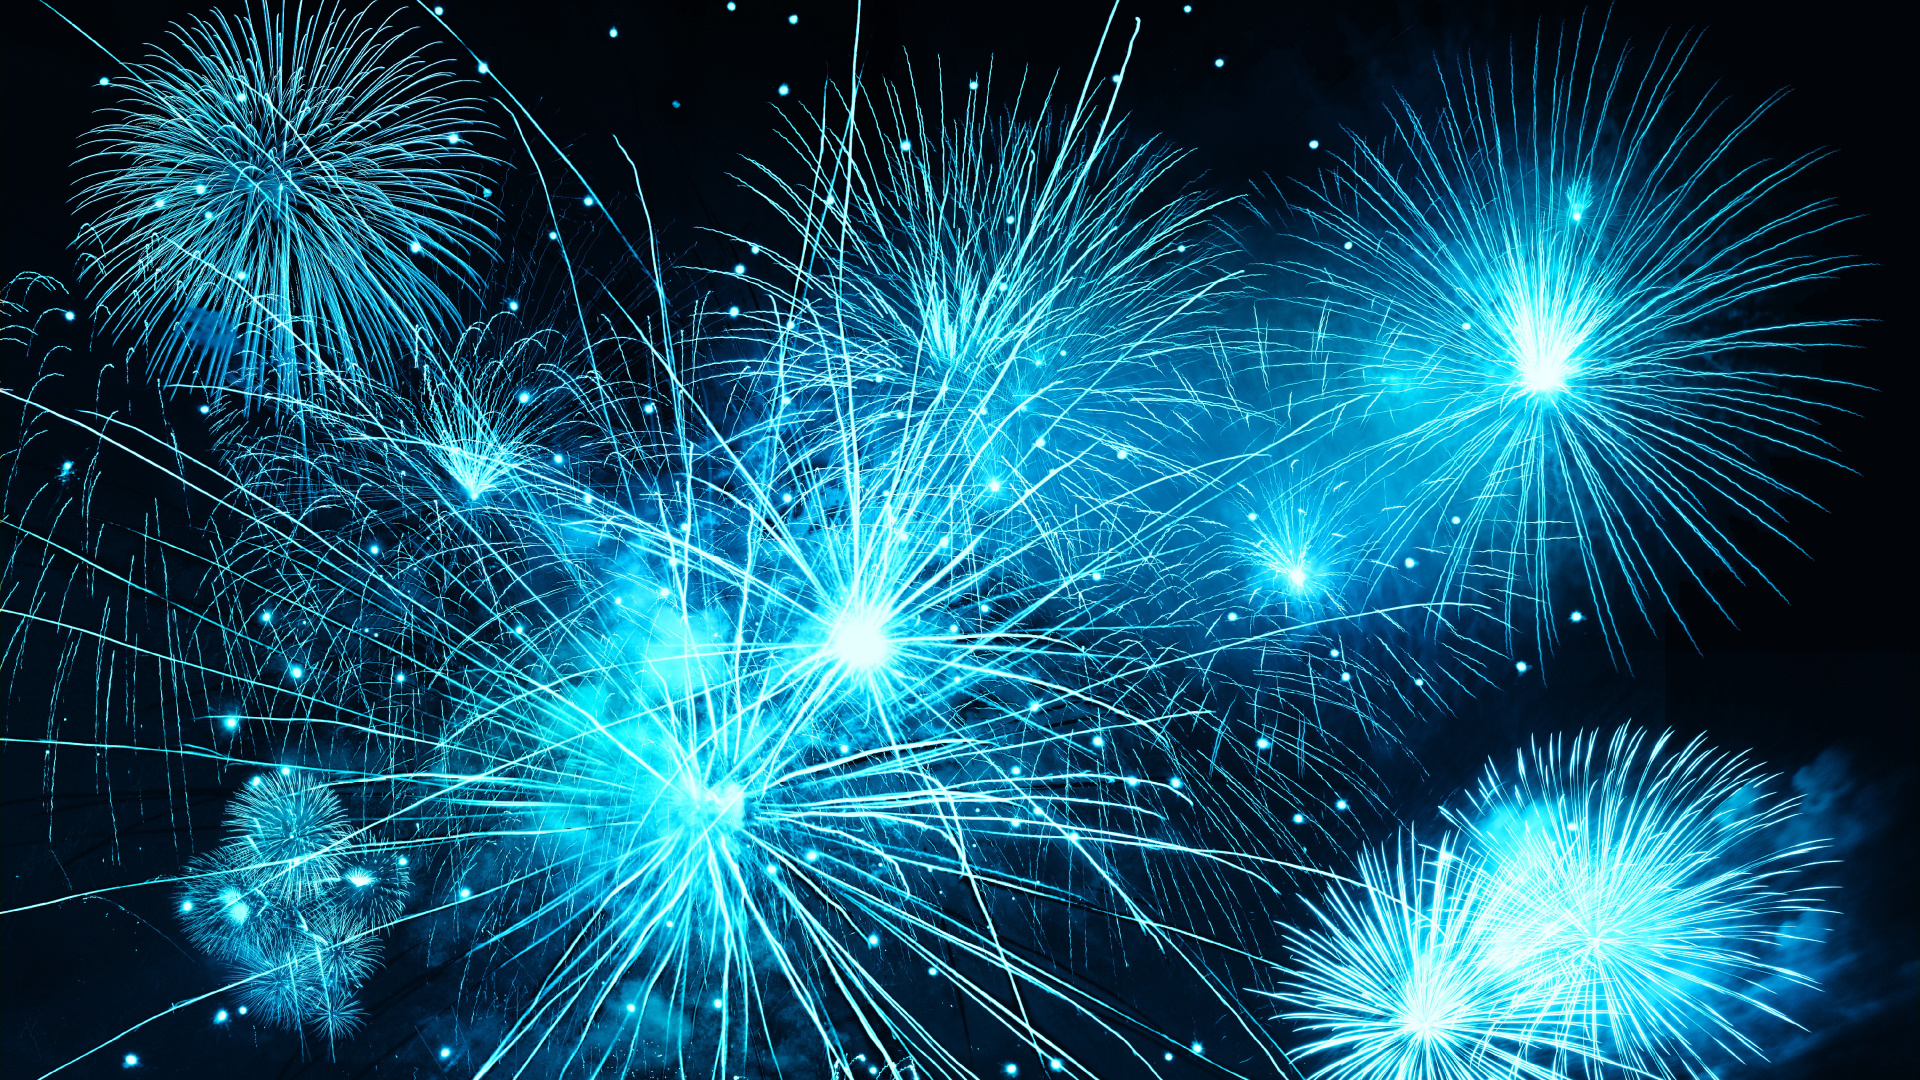 New Years Eve, New Year, New Years Day, Party, Fireworks. Wallpaper in 1920x1080 Resolution